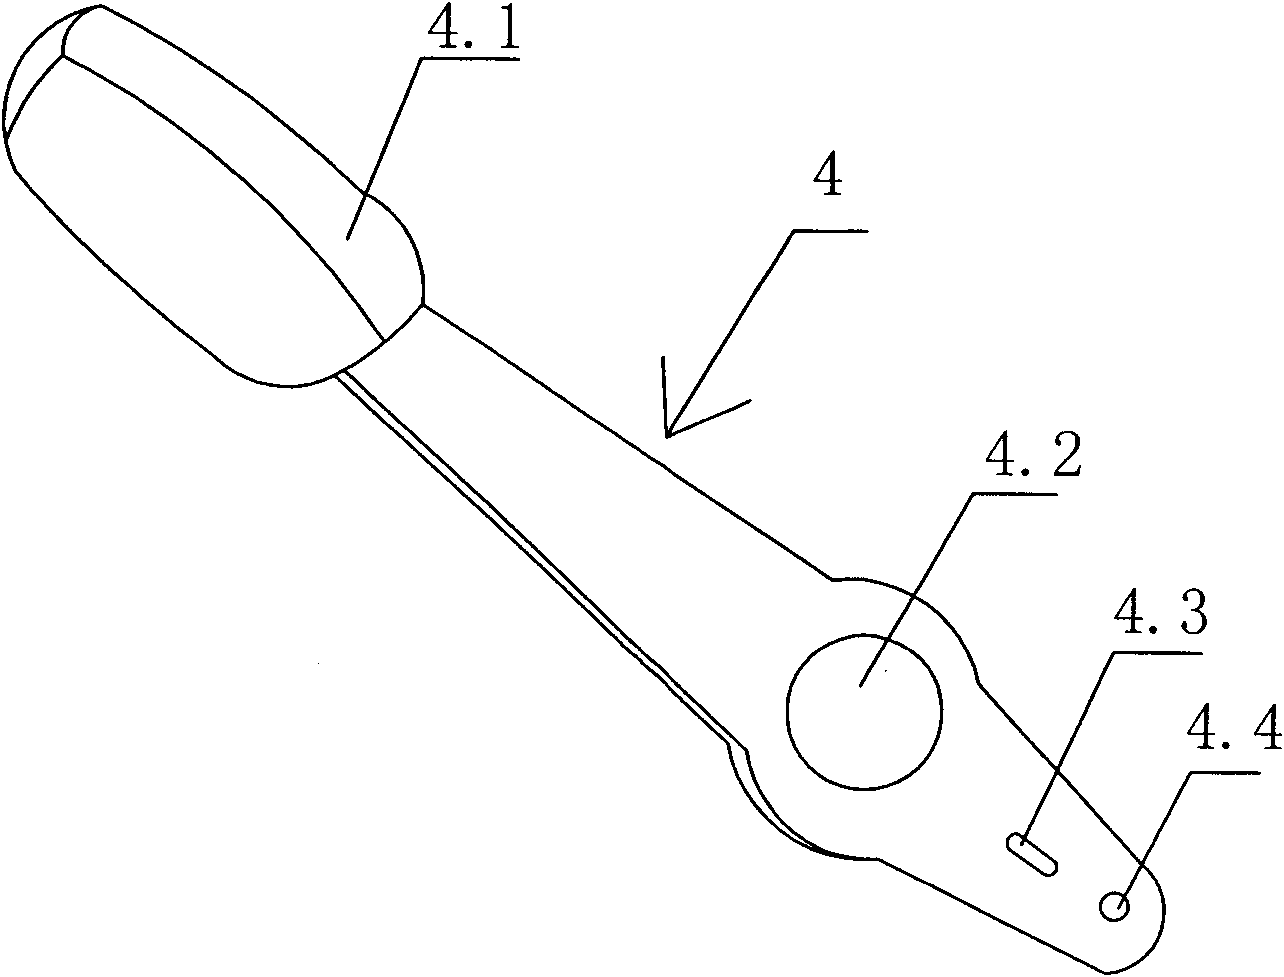 Accelerator control device for grass mower not easy to trip over stop